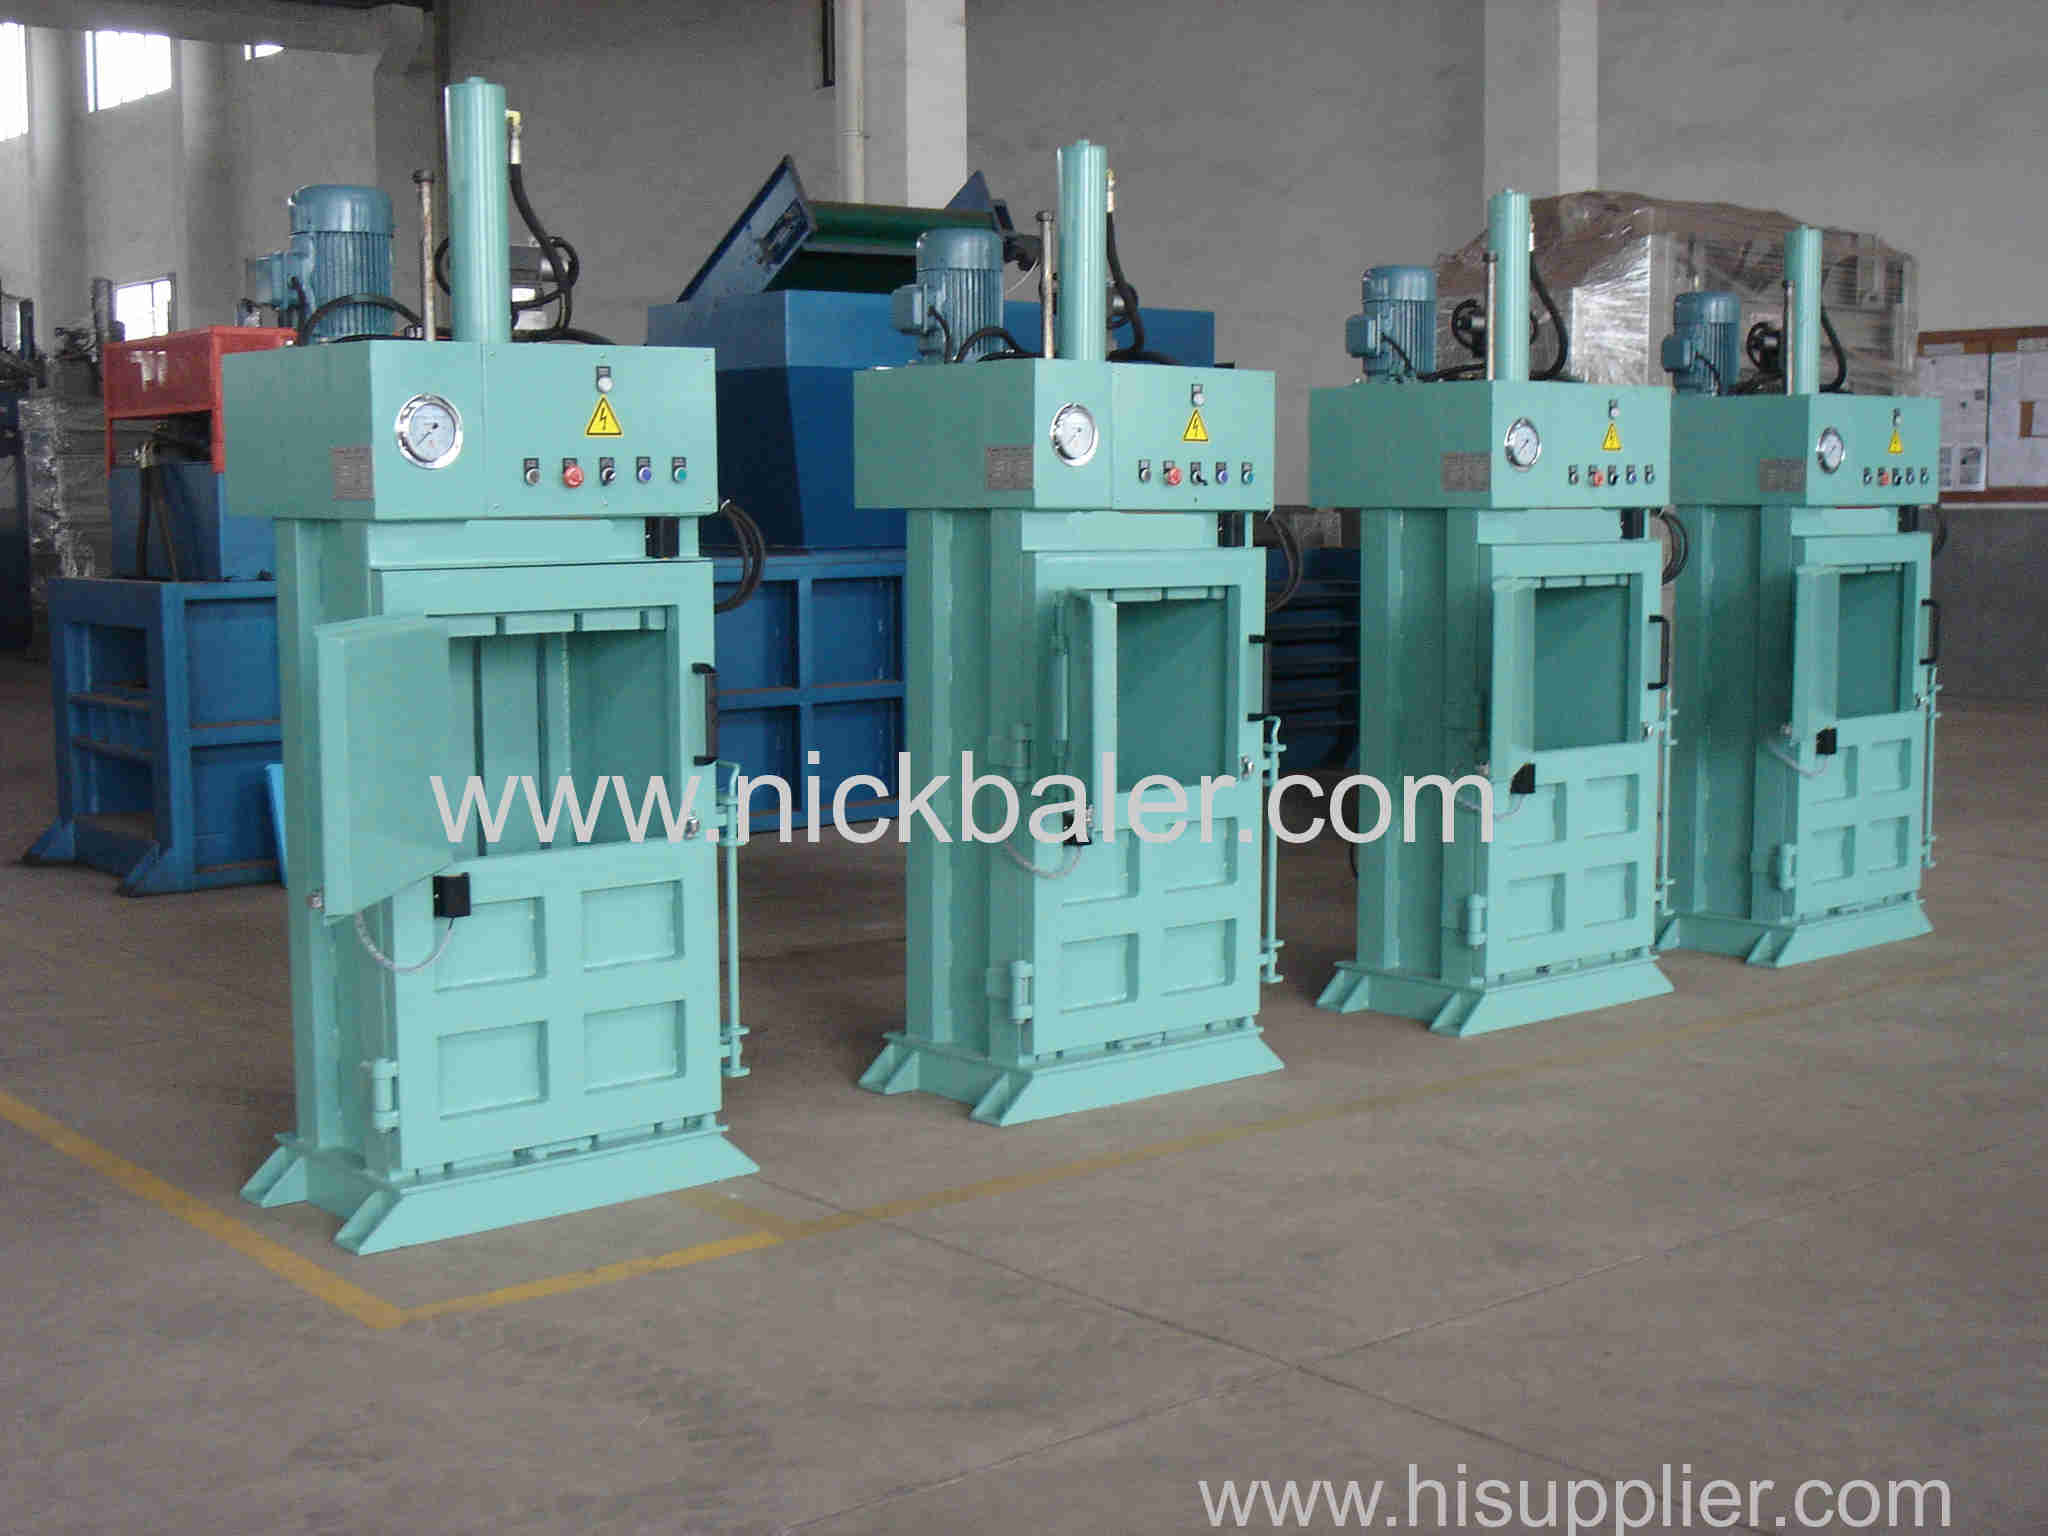 You want to buy hydraulic balers I recommend Shaanxi Nick